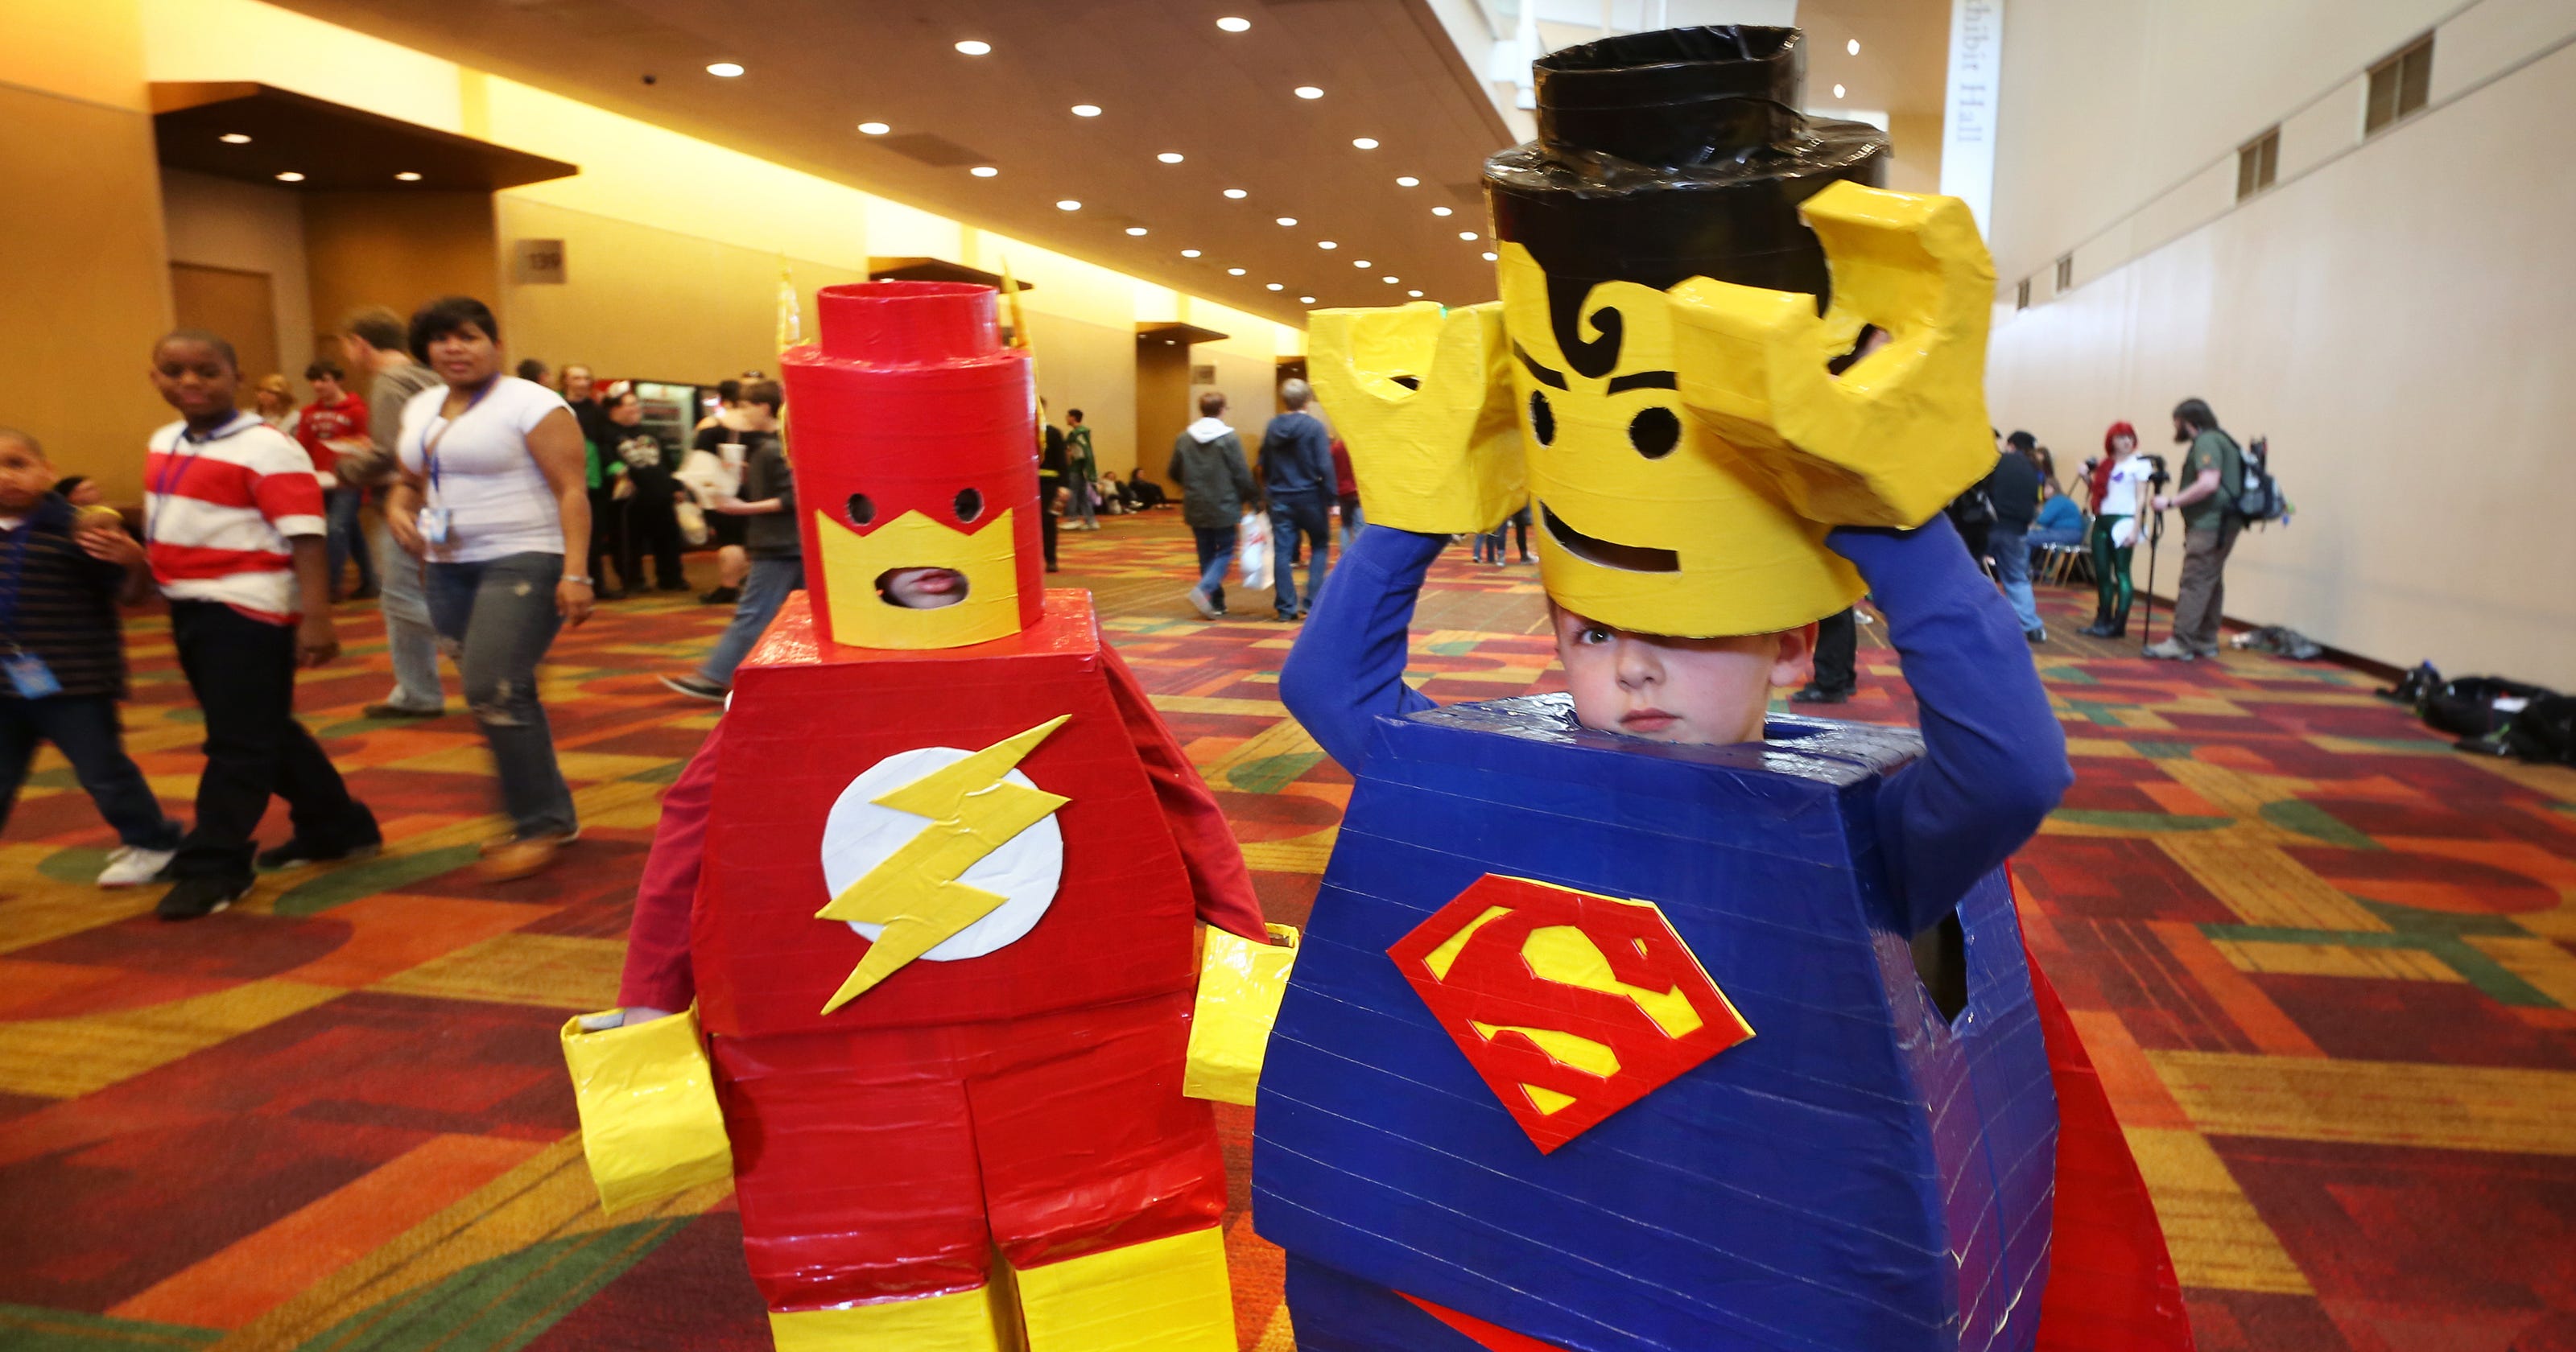 Indiana Comic Con 2019 Tickets, celebrity guests and more